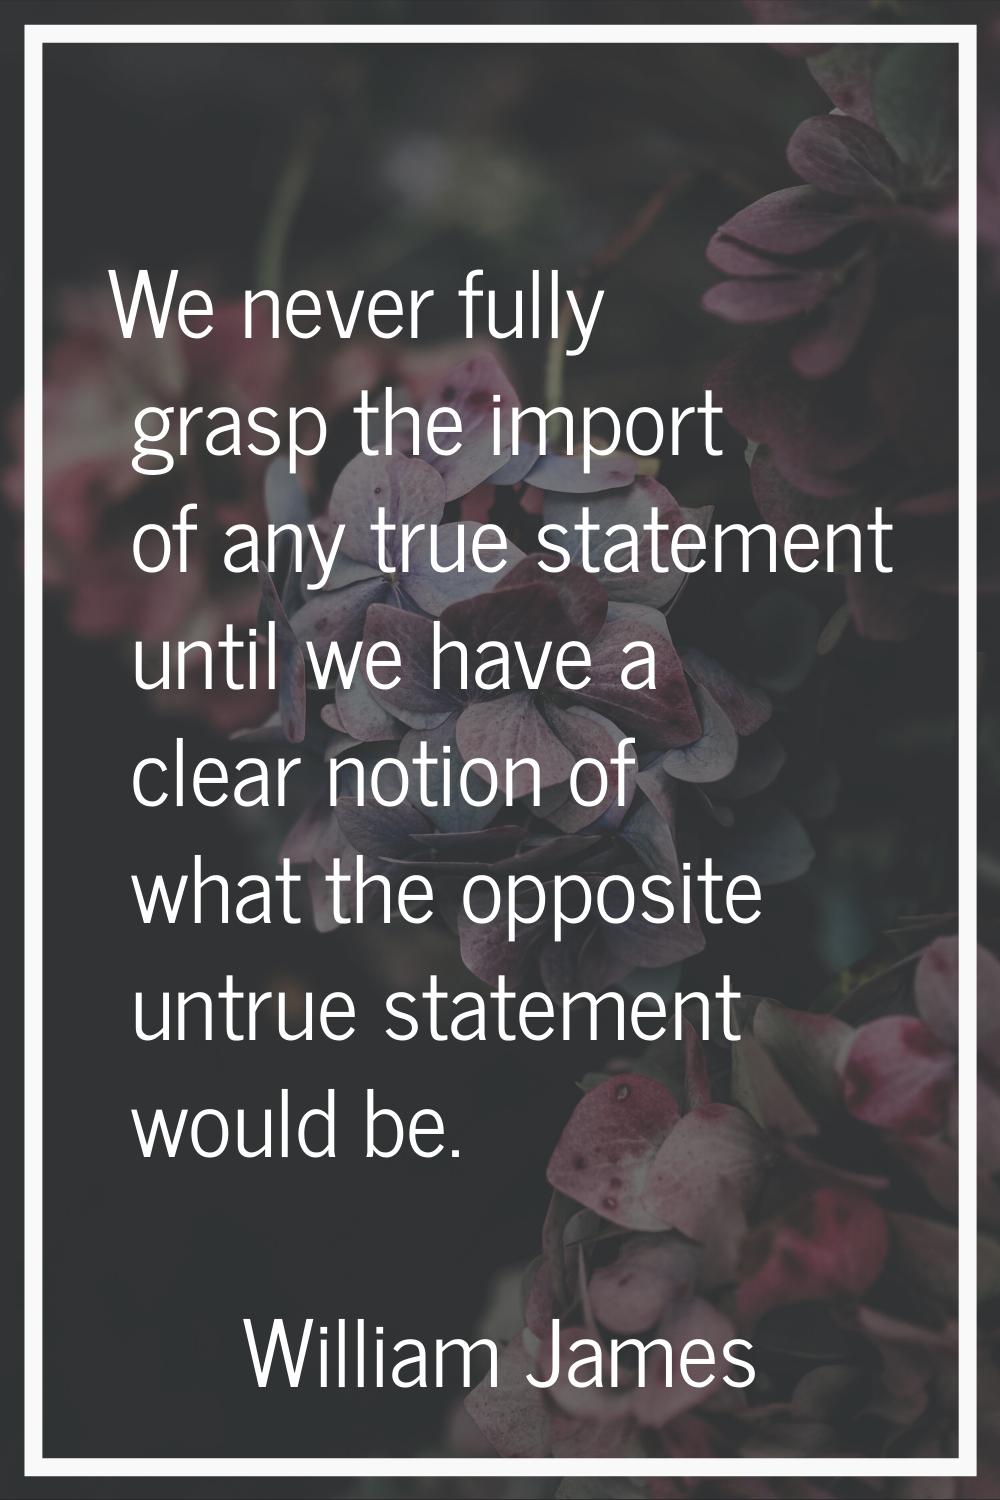 We never fully grasp the import of any true statement until we have a clear notion of what the oppo